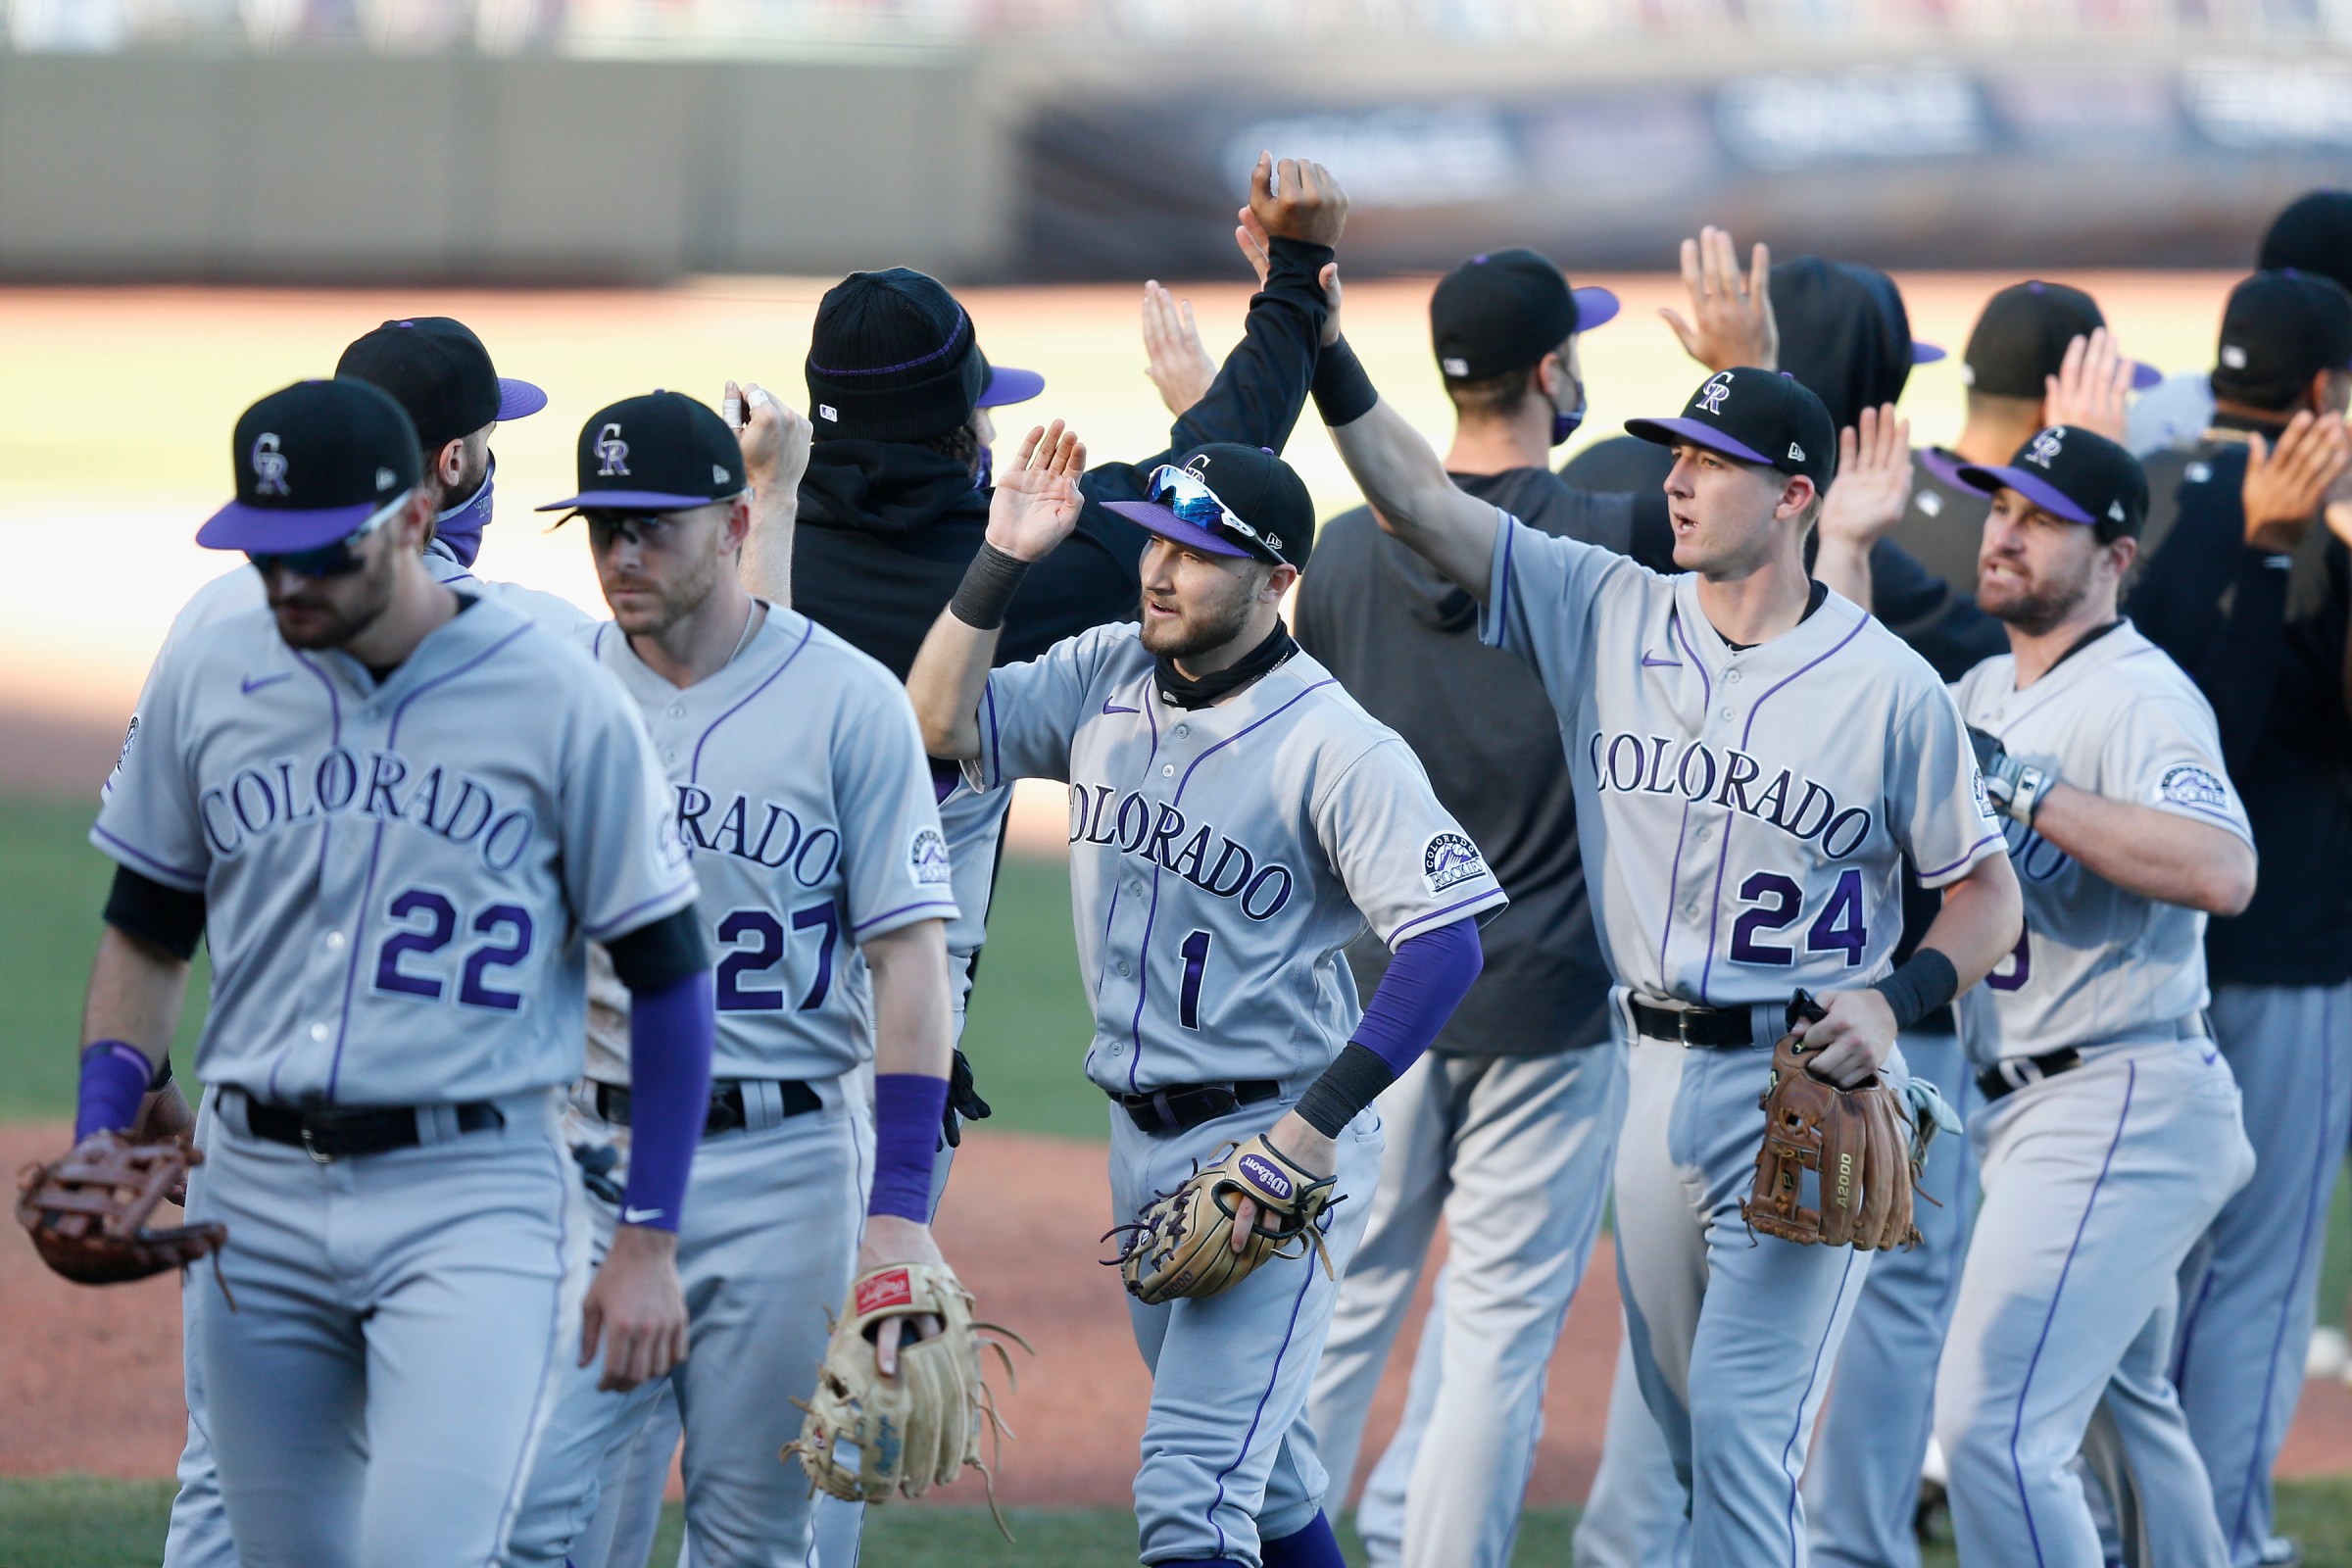 Colorado Rockies players celebrate after their win against the San Francisco Giants